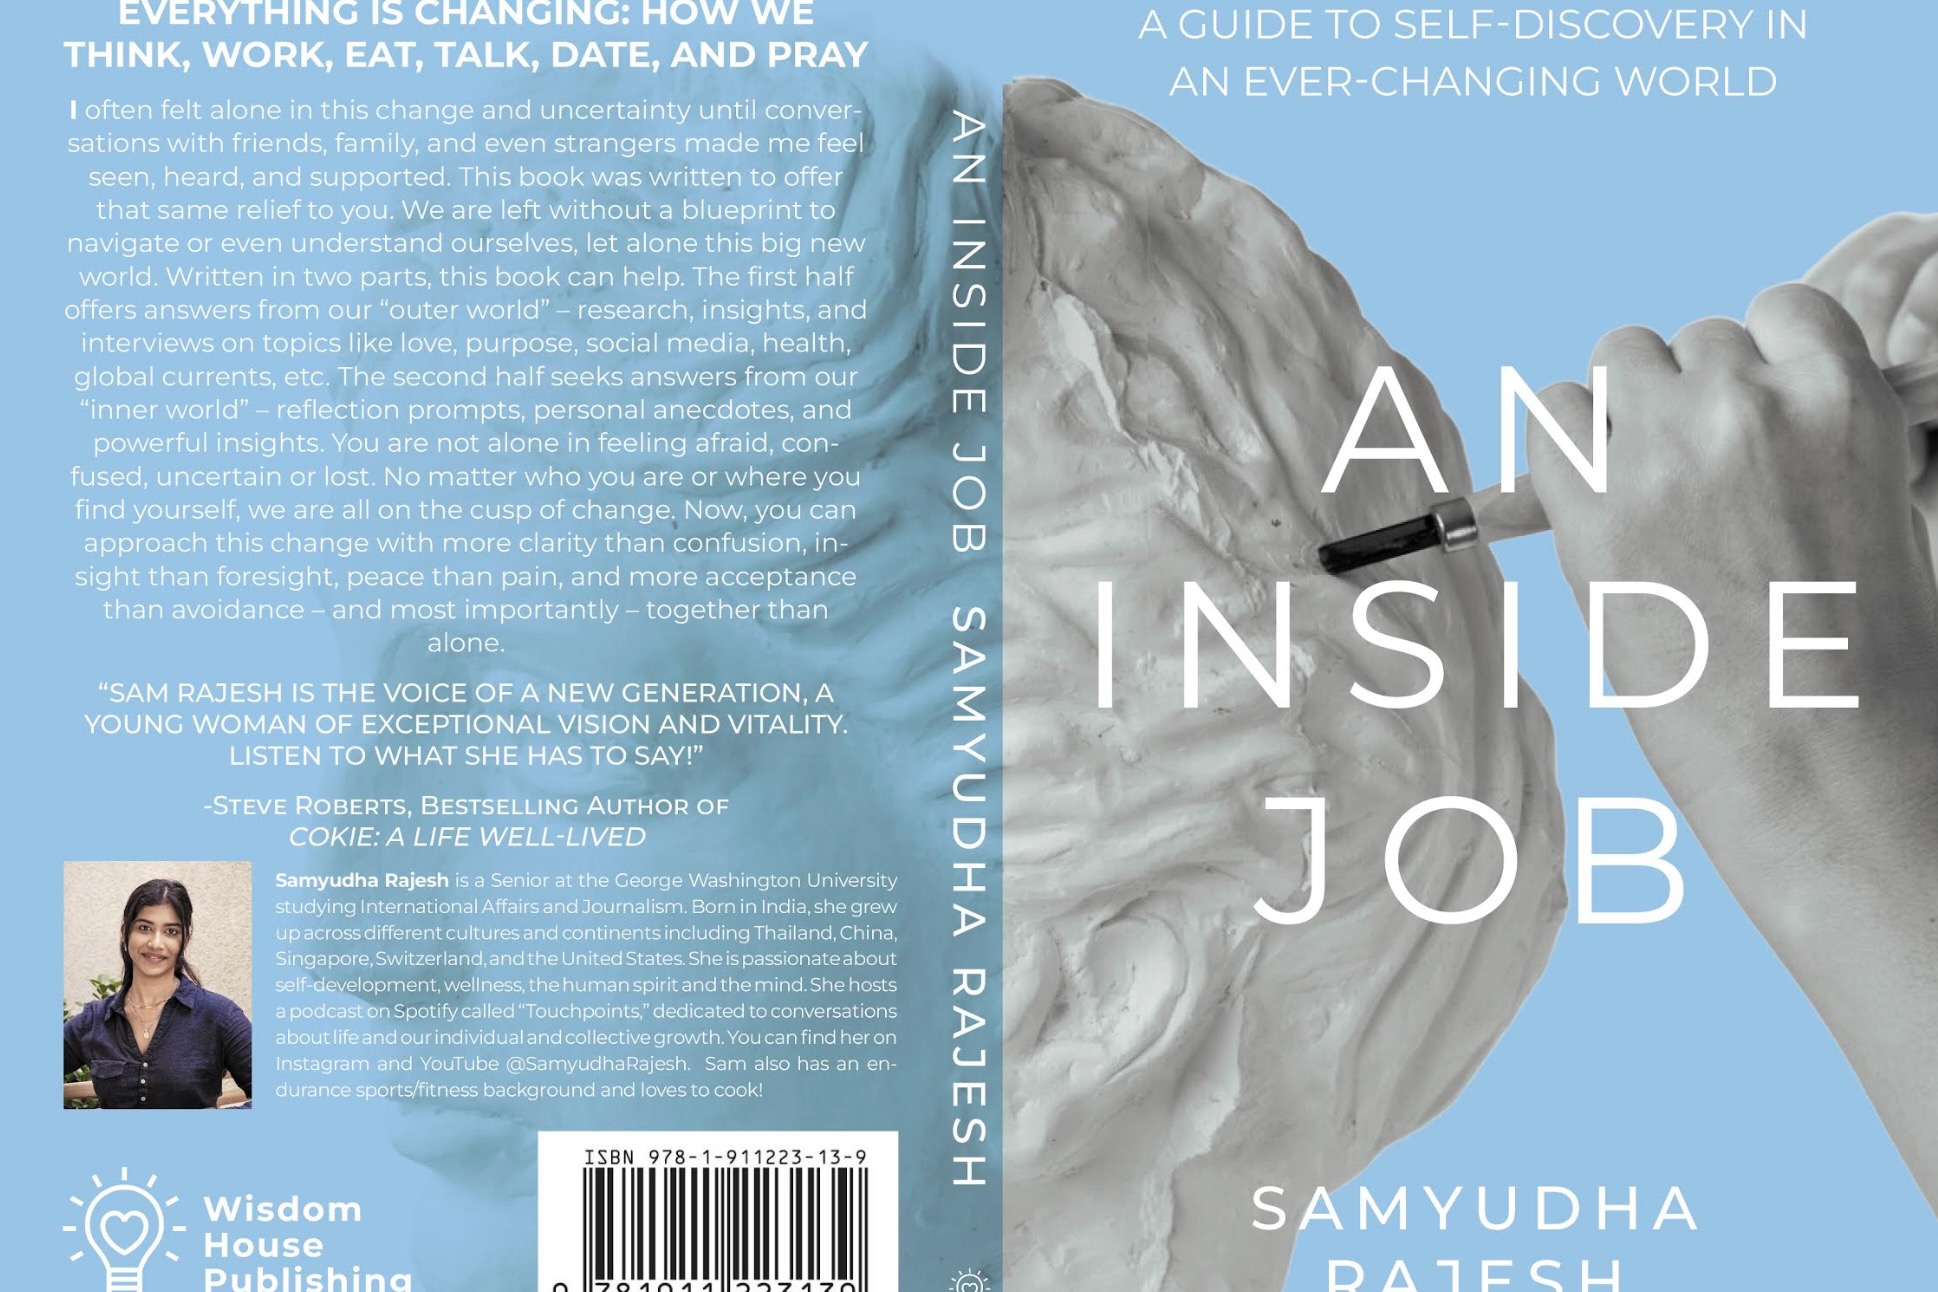 “An Inside Job: A Guide to Self-discovery in an Ever-Changing World" by  Samyudha Rajesh